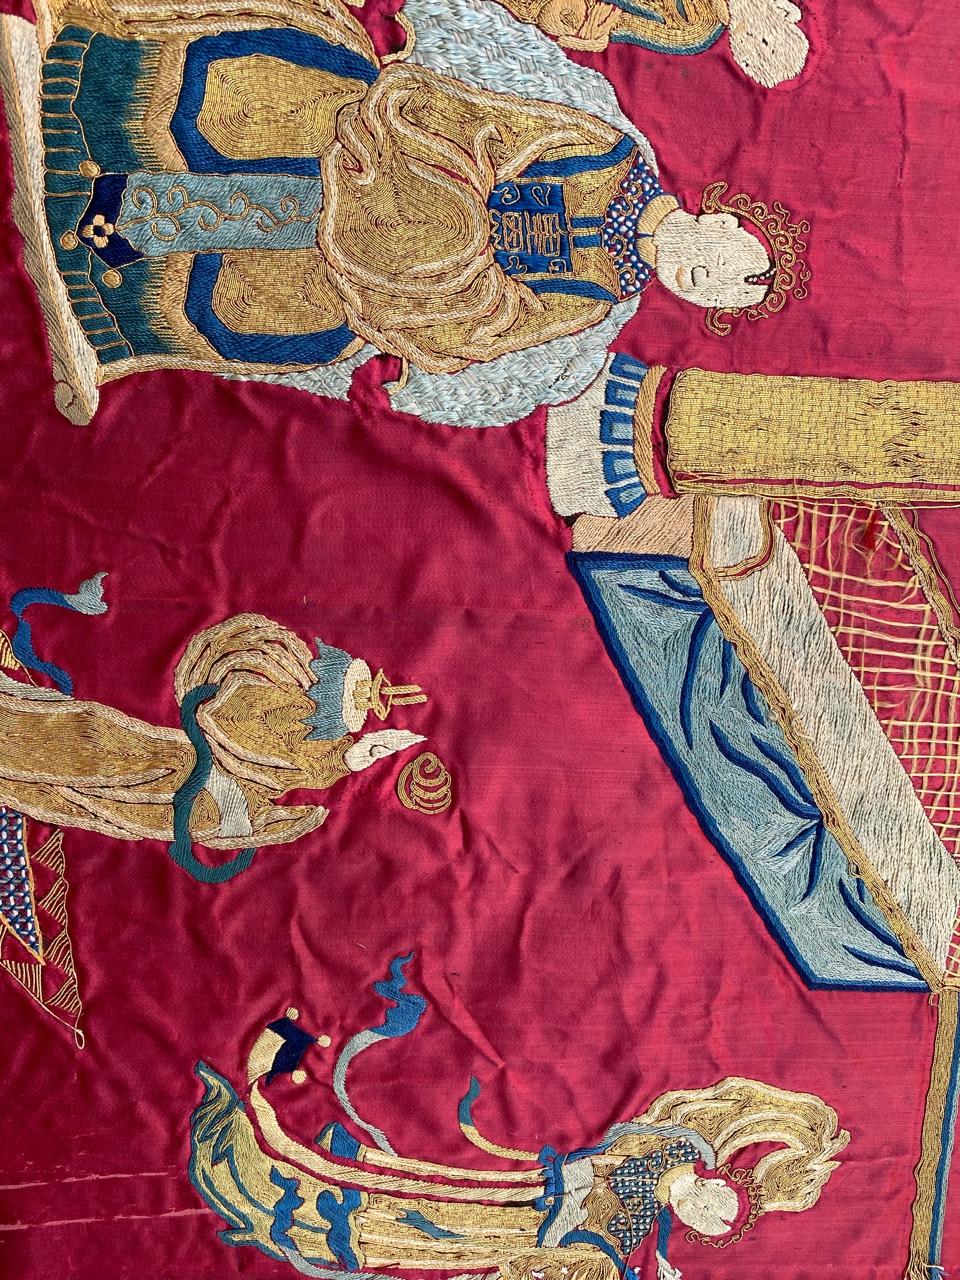 Bobyrug's Antique Chinese Silk and Metal Embroidery (broderie chinoise ancienne sur soie et métal) en vente 2